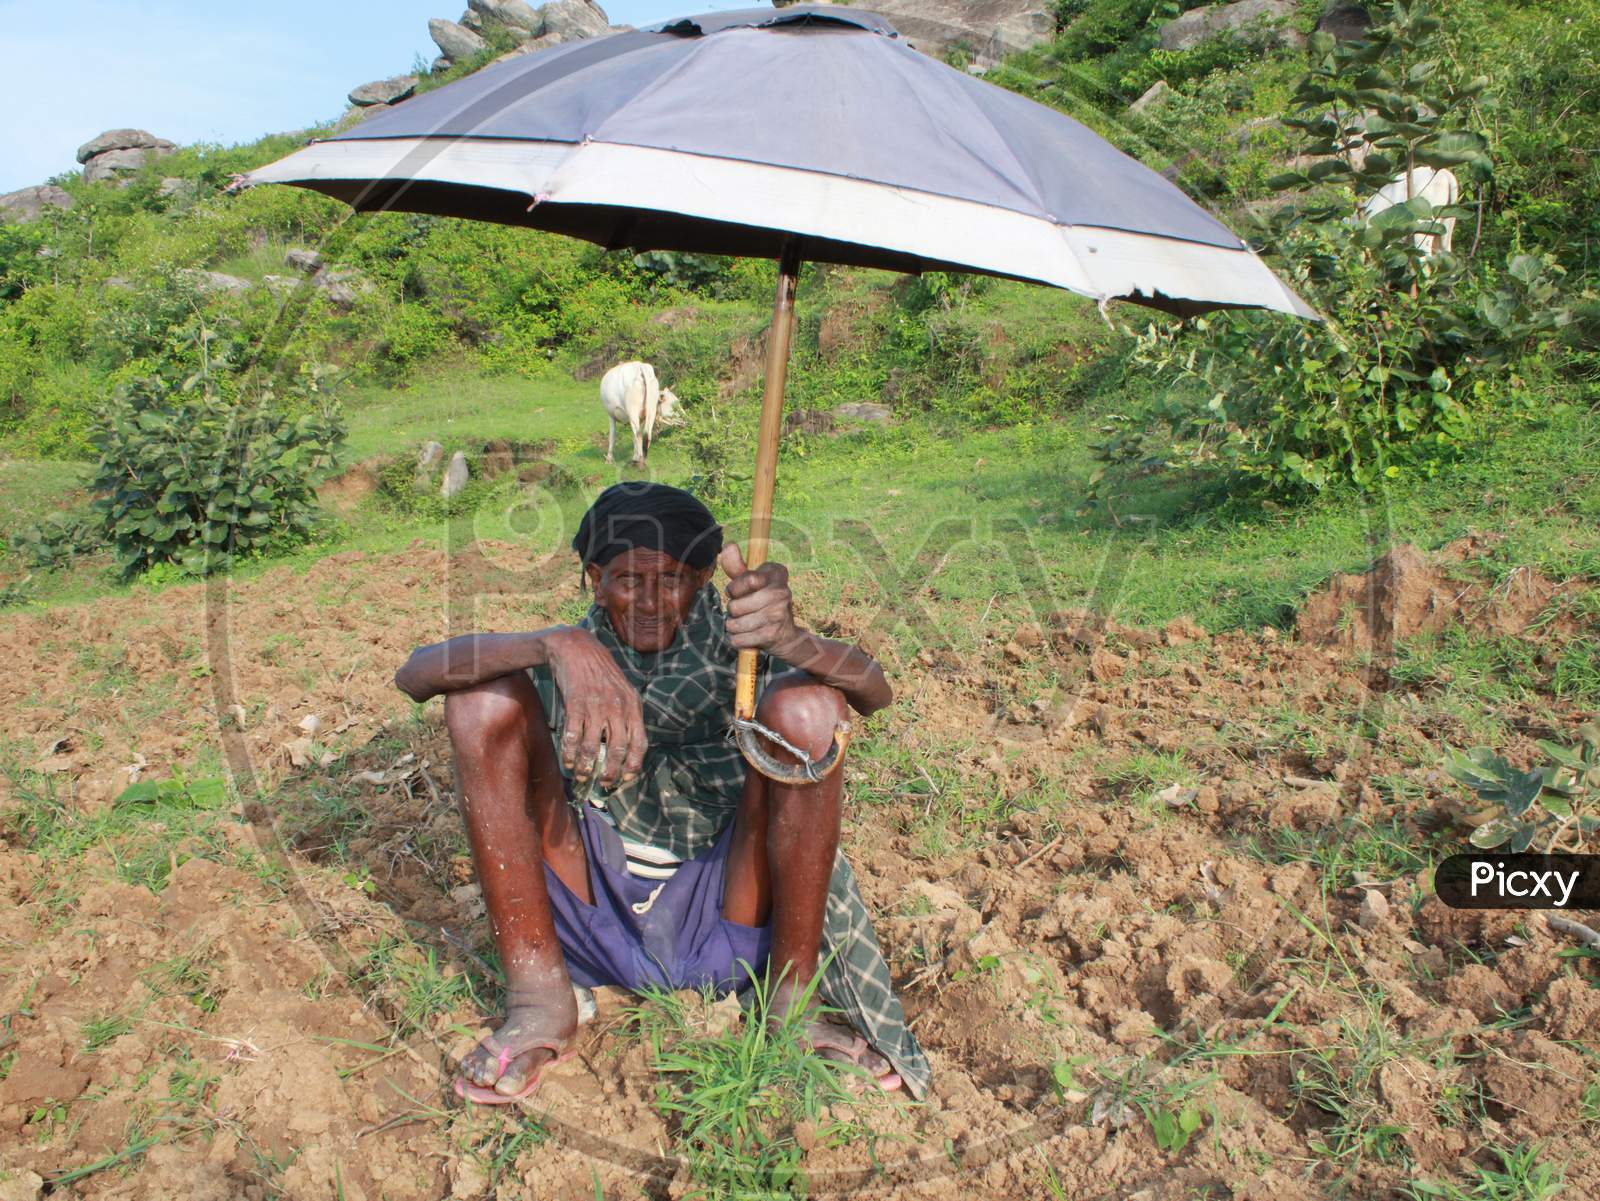 Old poor Cow grazier site on soil with umbrella